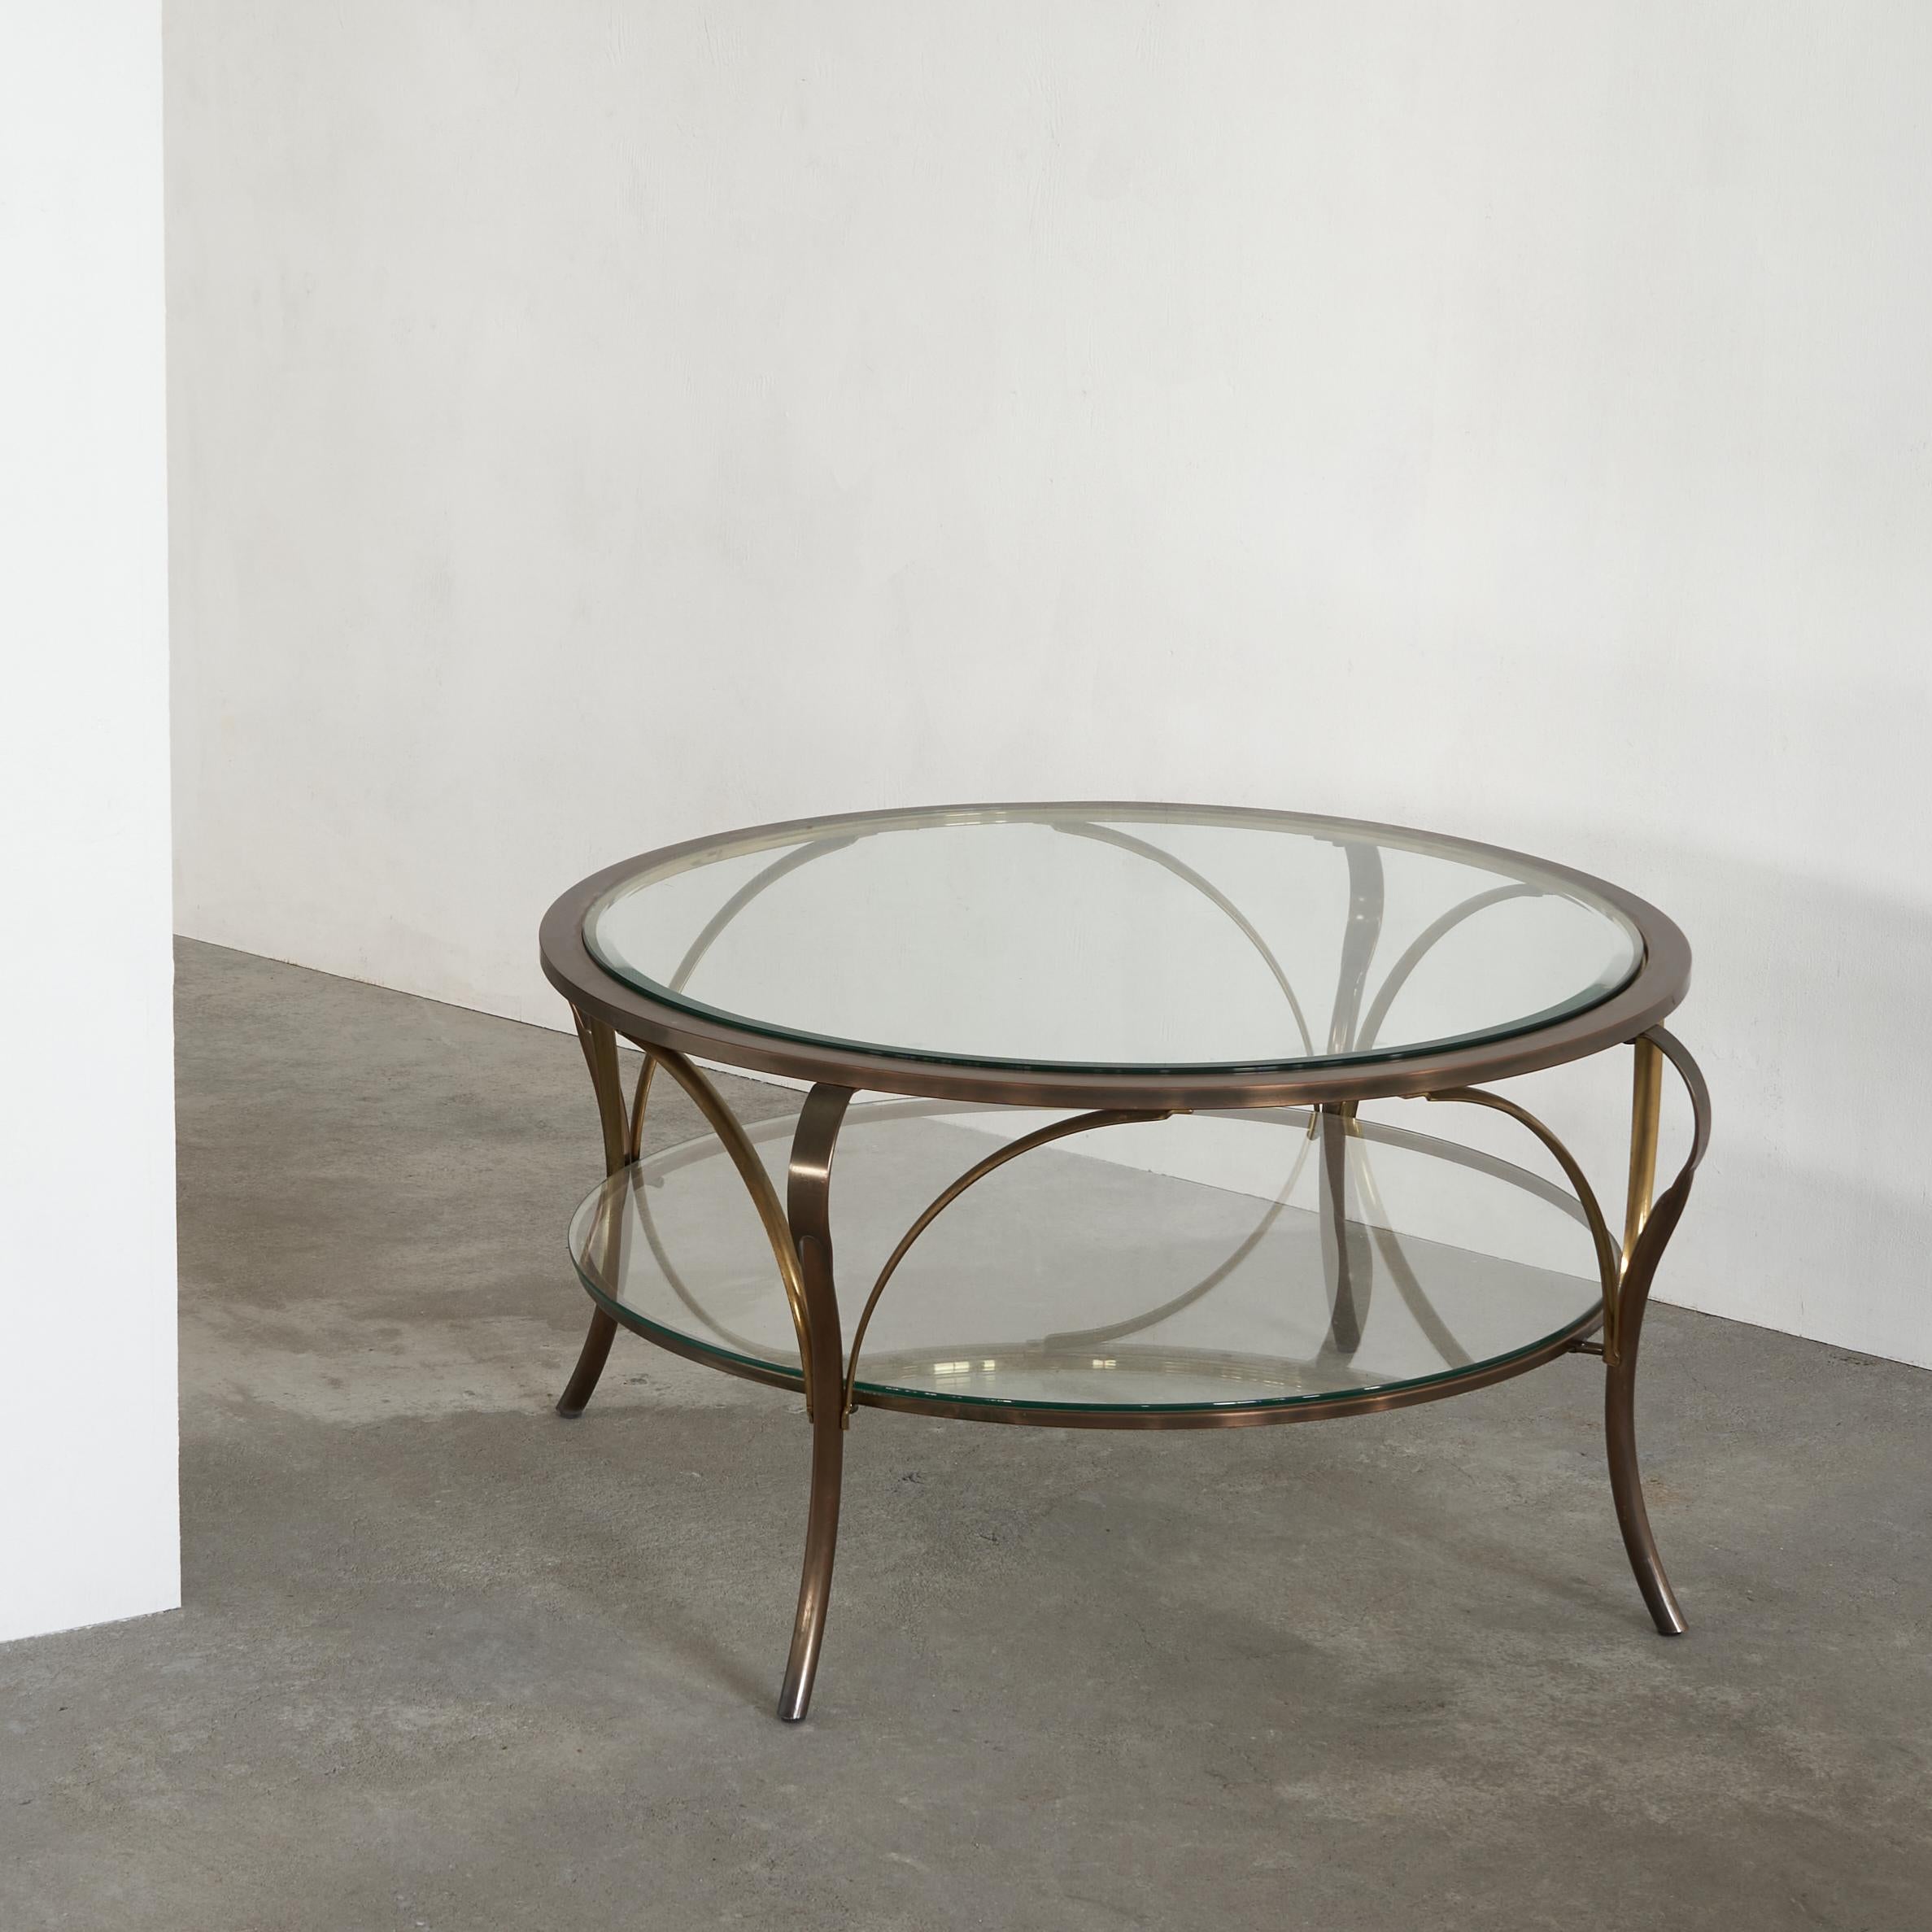 Very elegant coffee table in glass and brass. A classic design with flowing lines, great curves and a wonderful interplay between the different materials.

Due to the glass this is a really airy and subtle coffee table. The two tier design